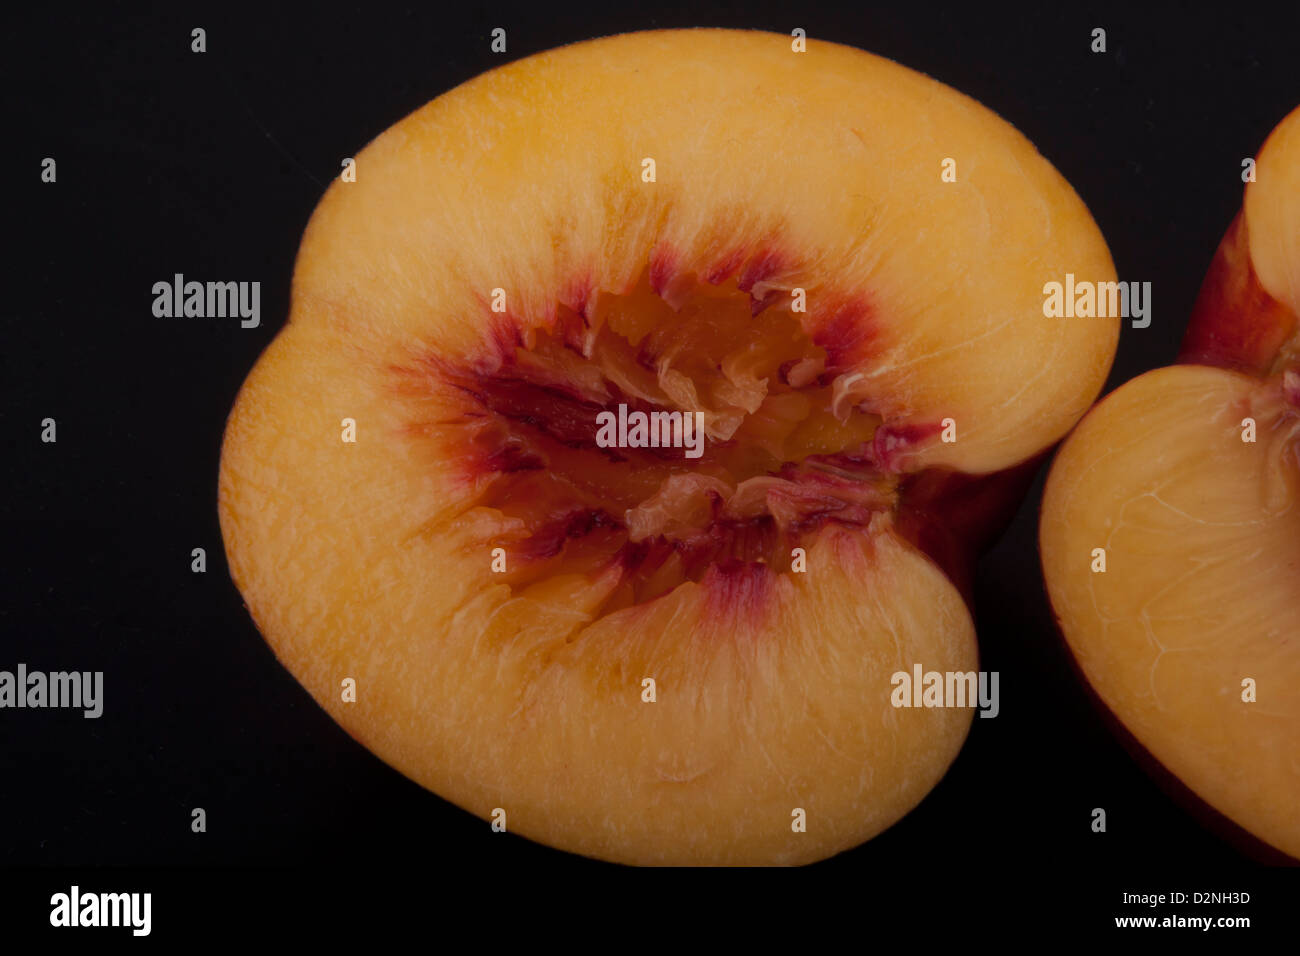 photo of peaches on a black background Stock Photo